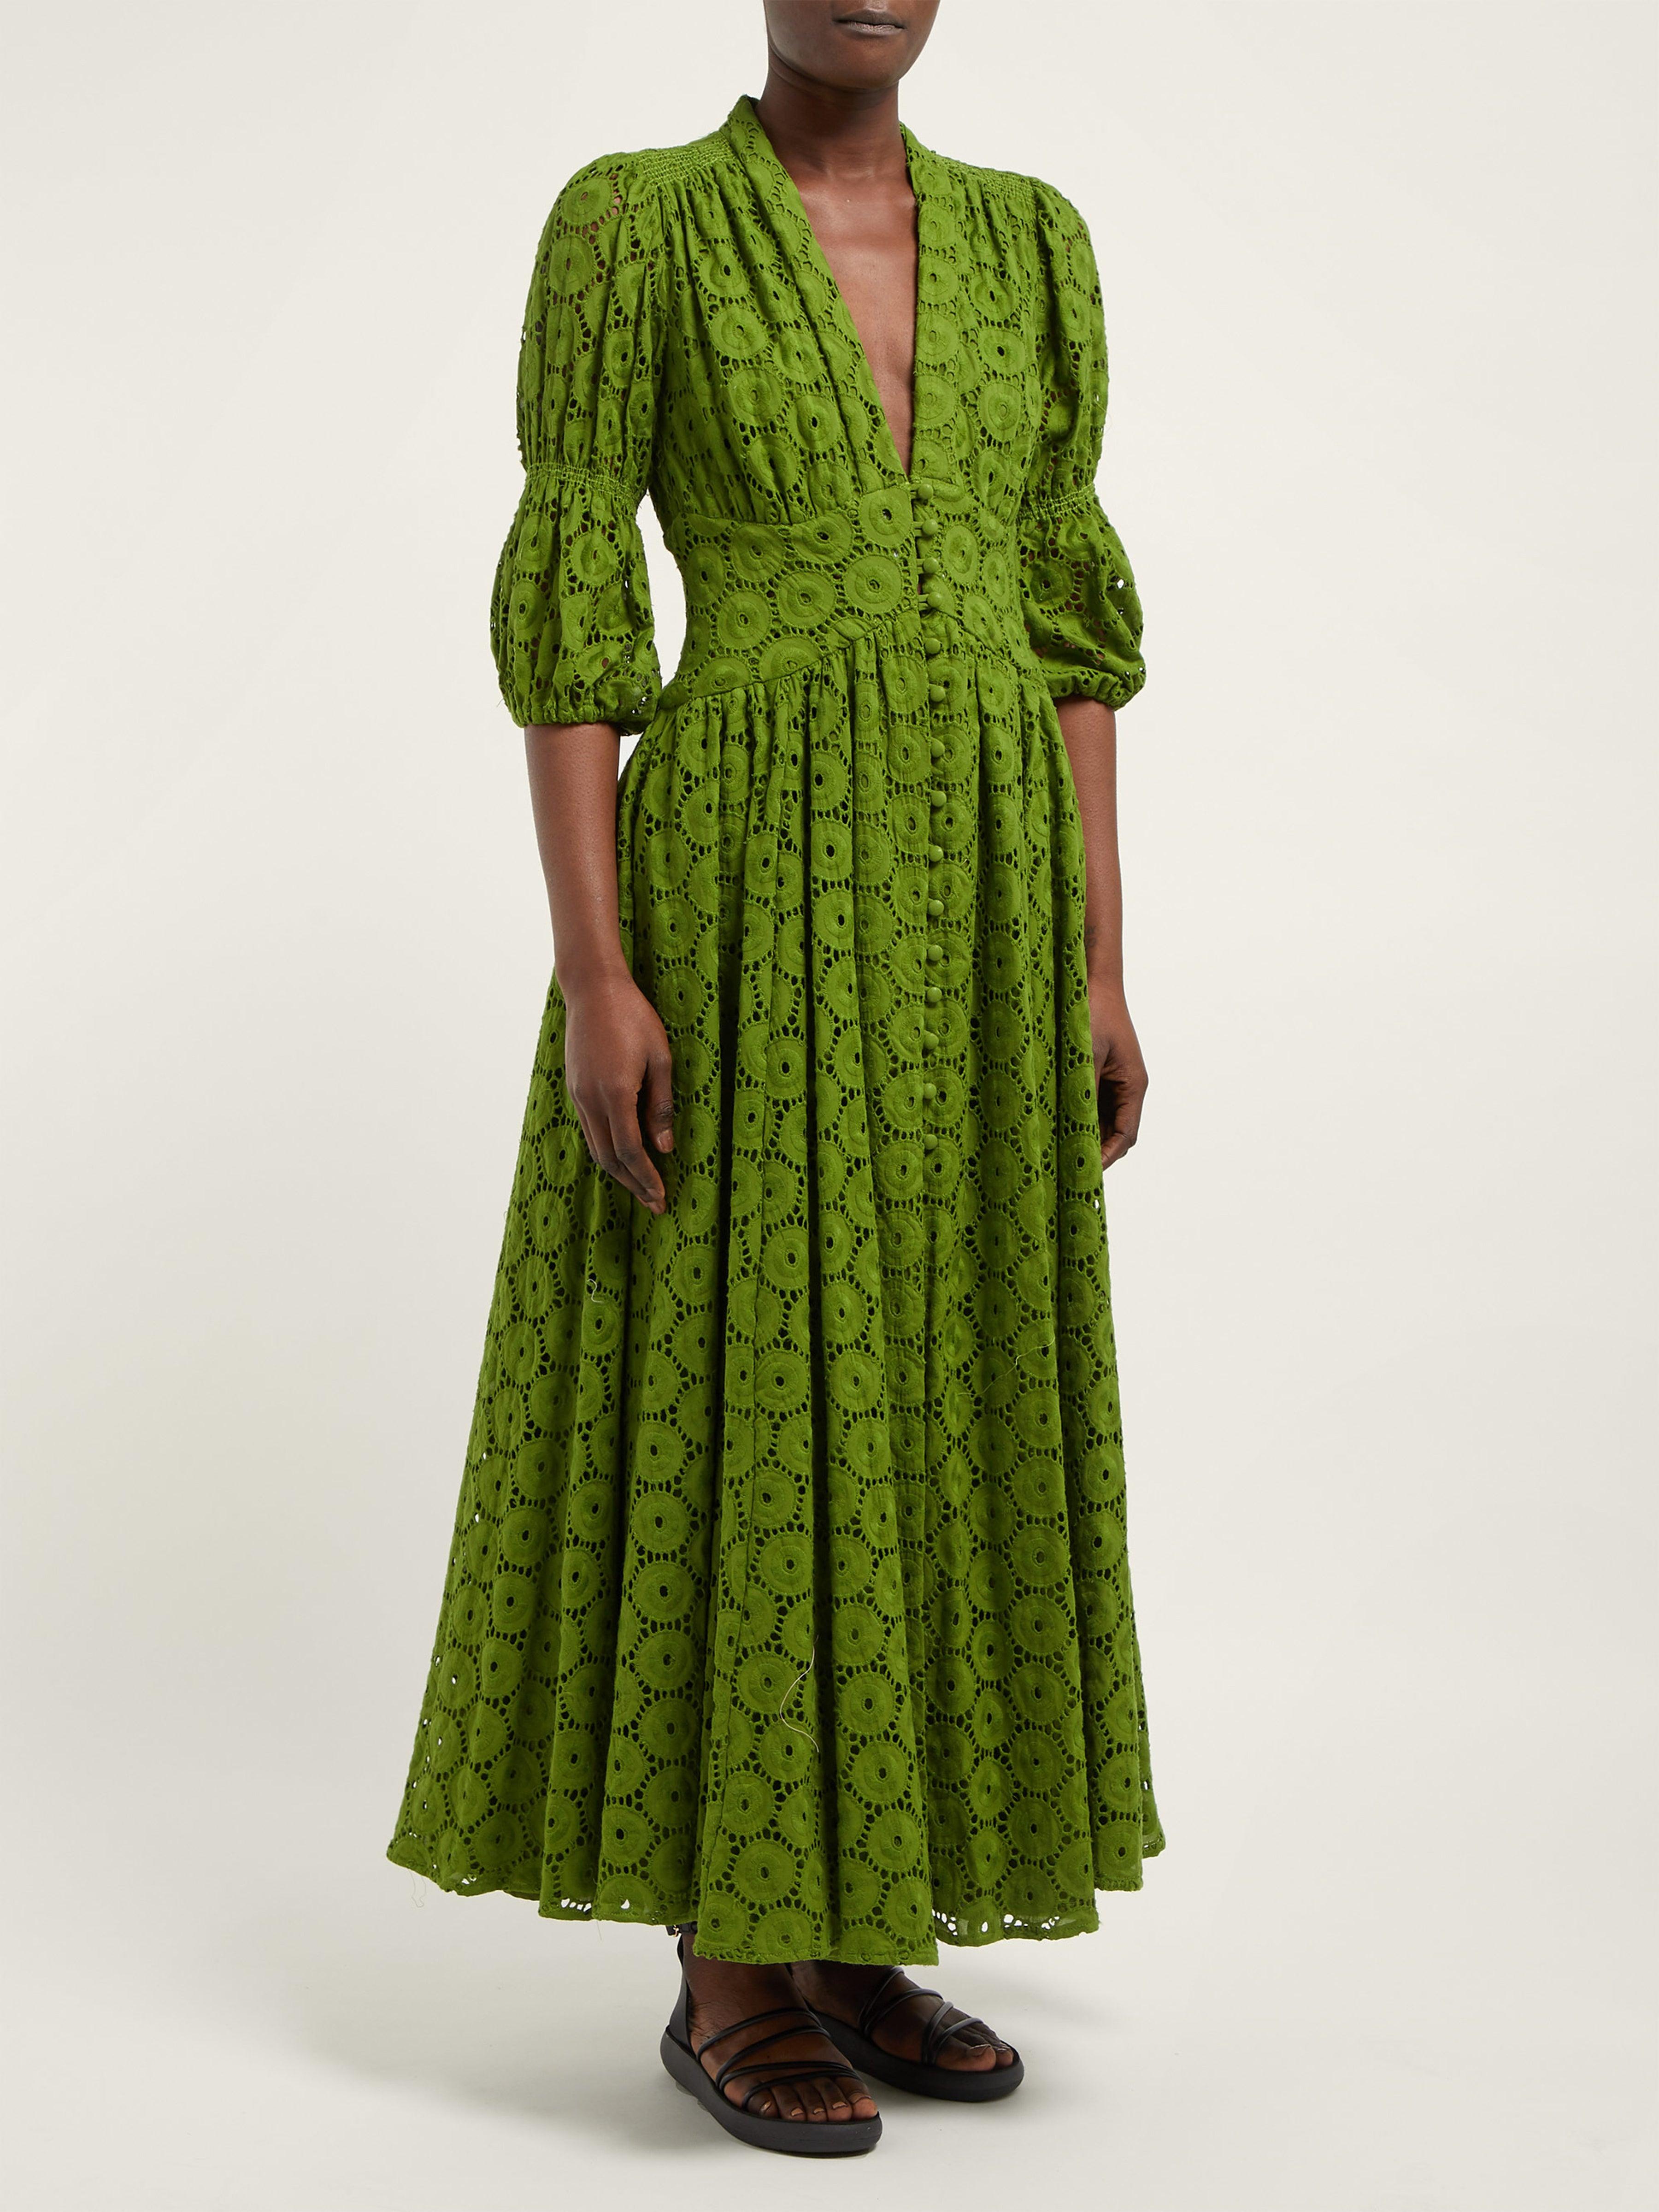 Cult Gaia Willow Puff-sleeve Eyelet-lace Maxi Dress in Green - Lyst